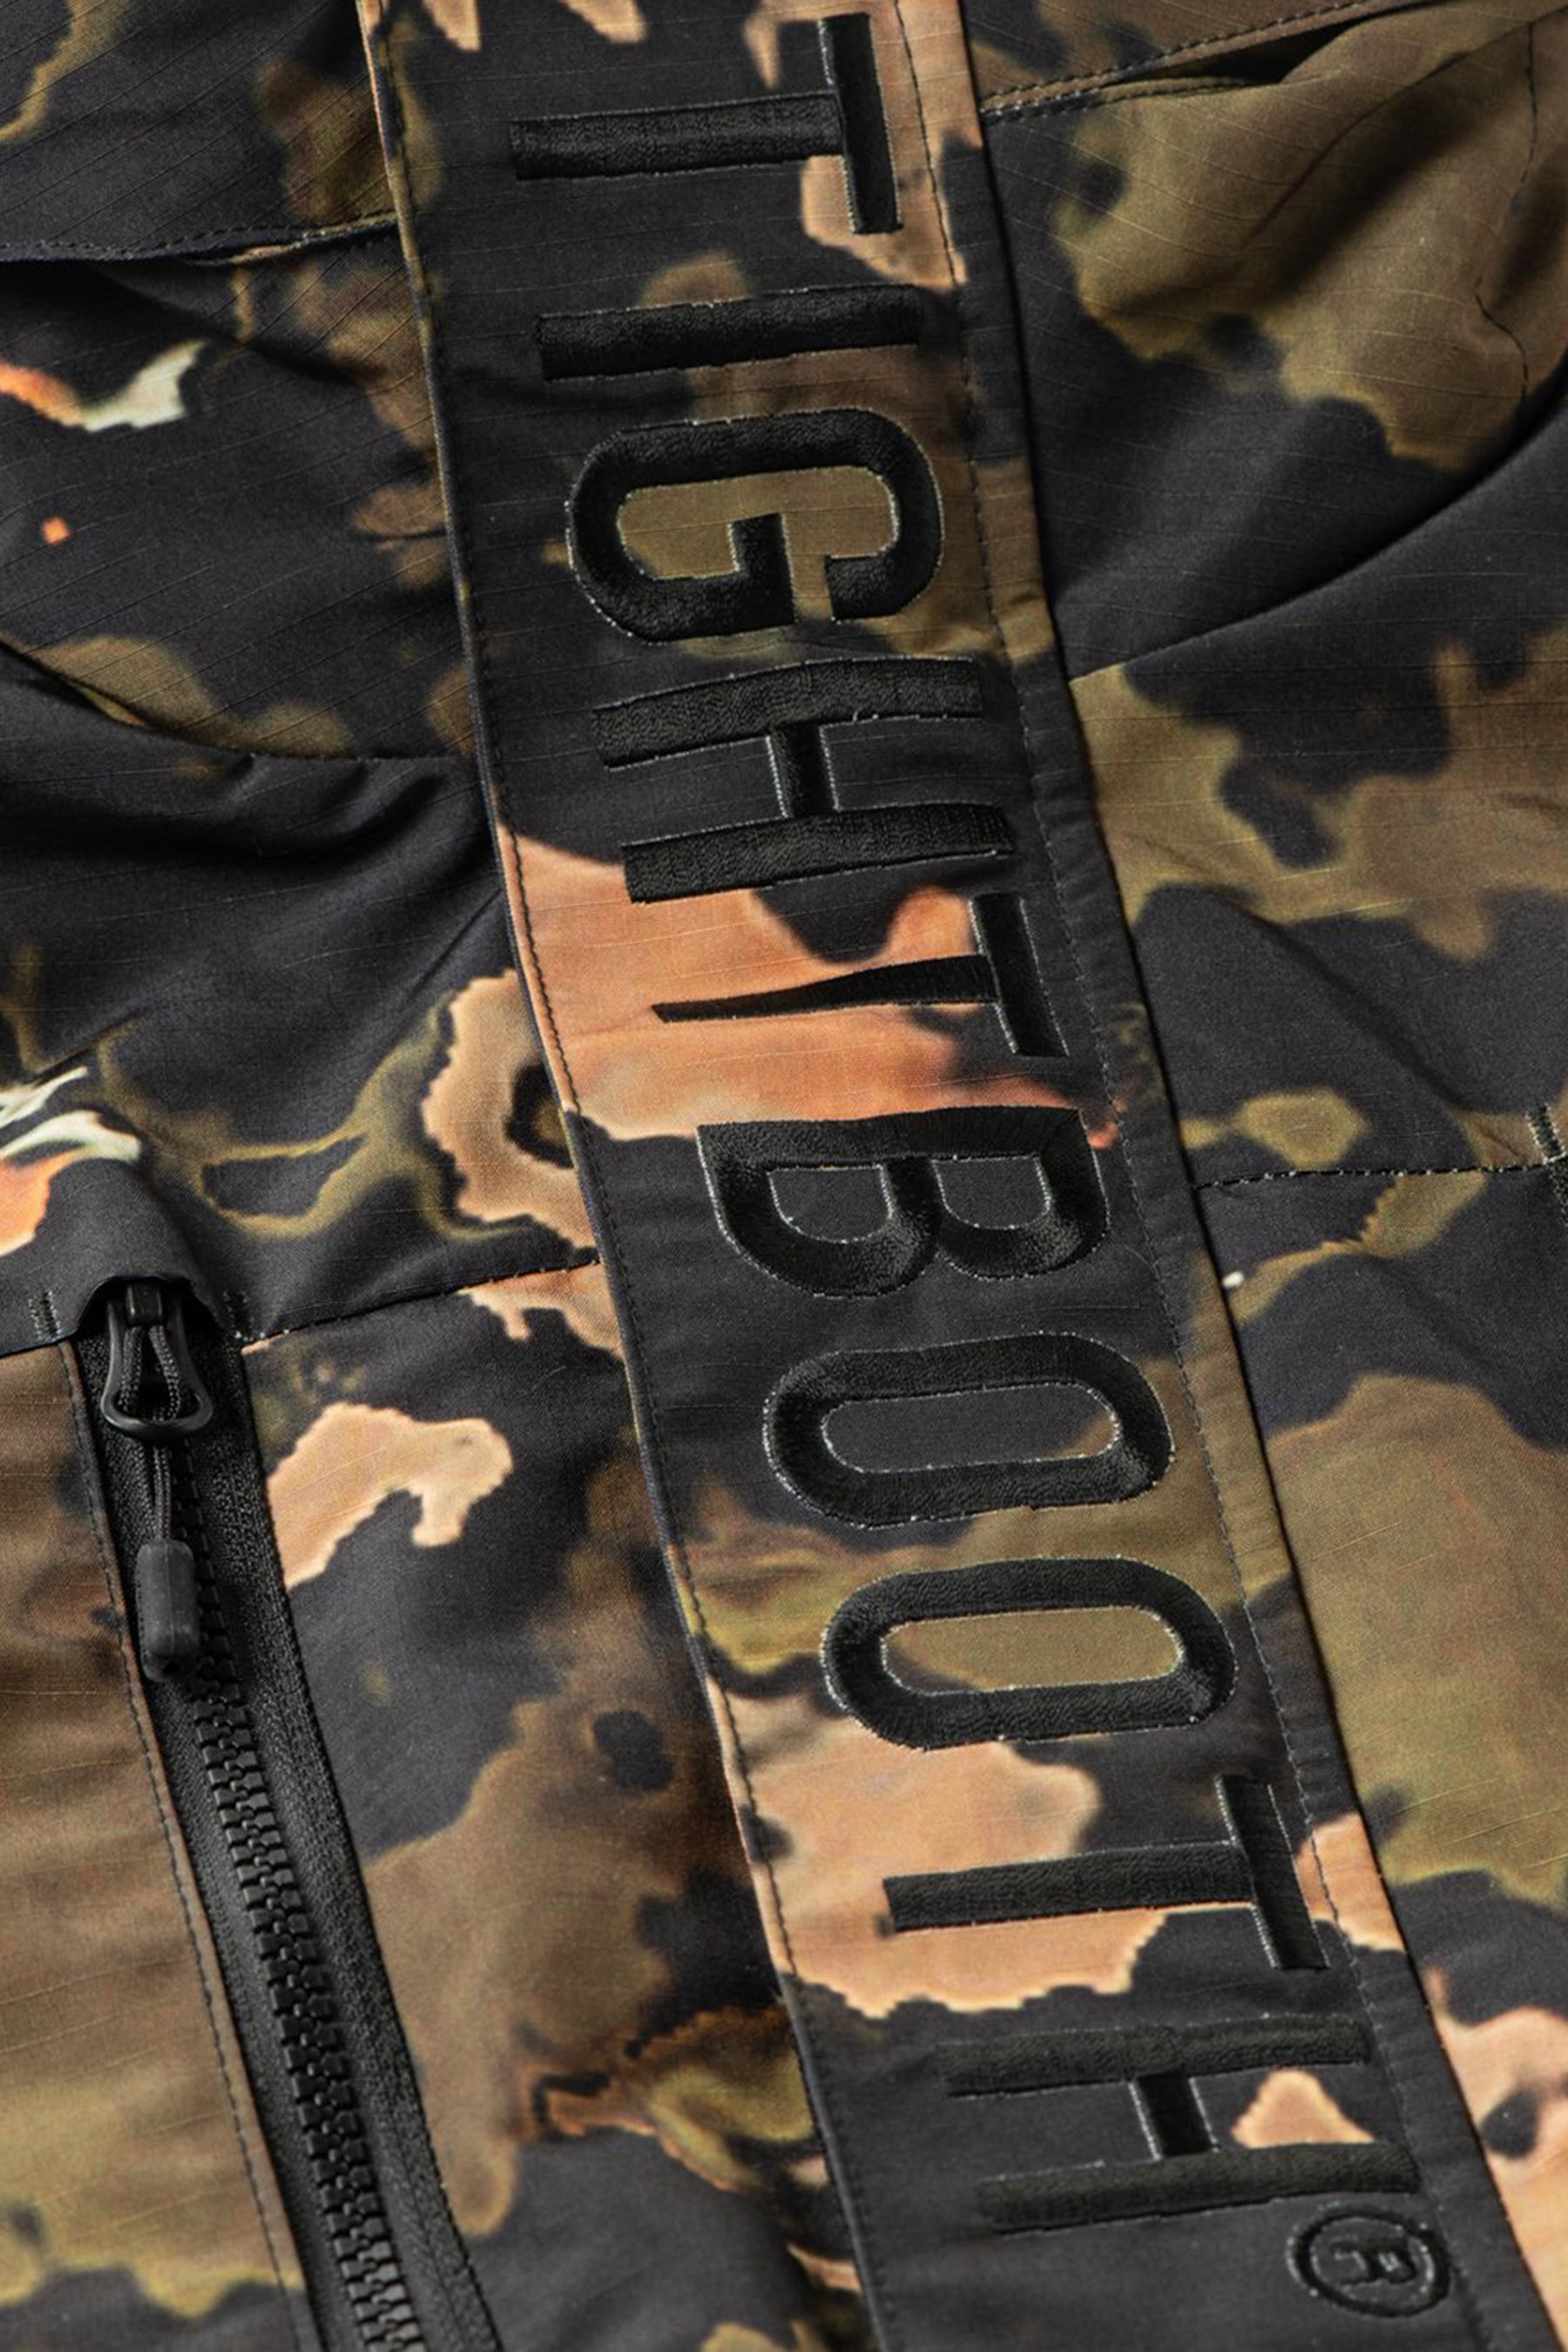 RIPSTOP TACT ICAL VEST / ORG CAMO